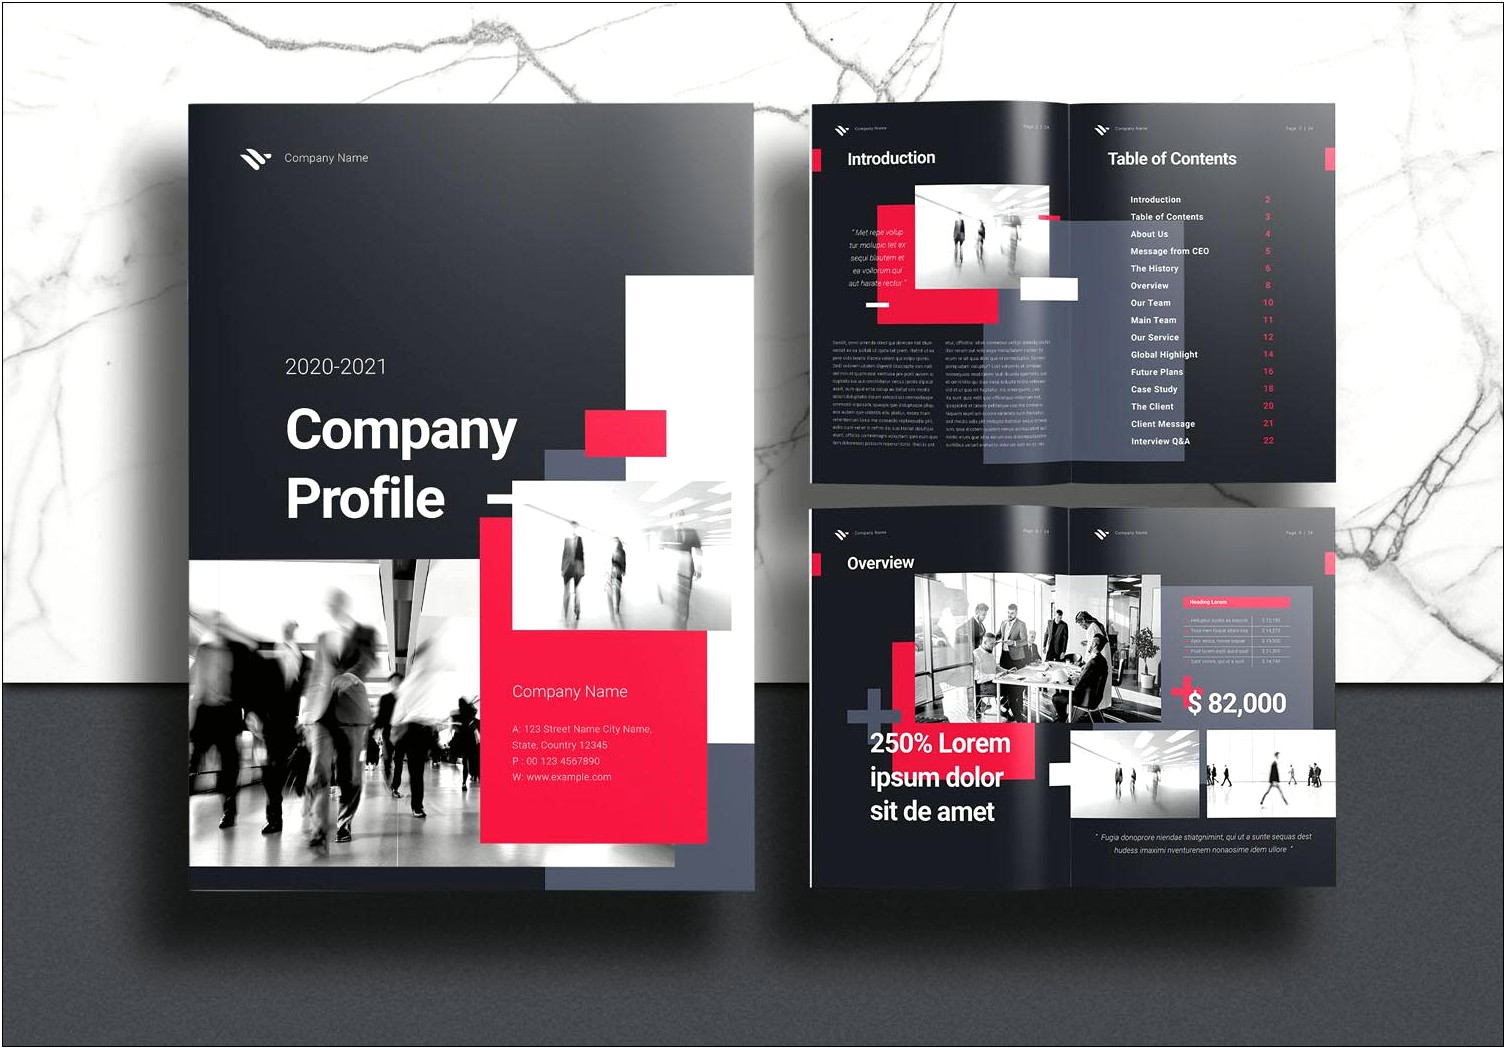 company-profile-indesign-template-free-download-templates-resume-designs-z21d8k91y9